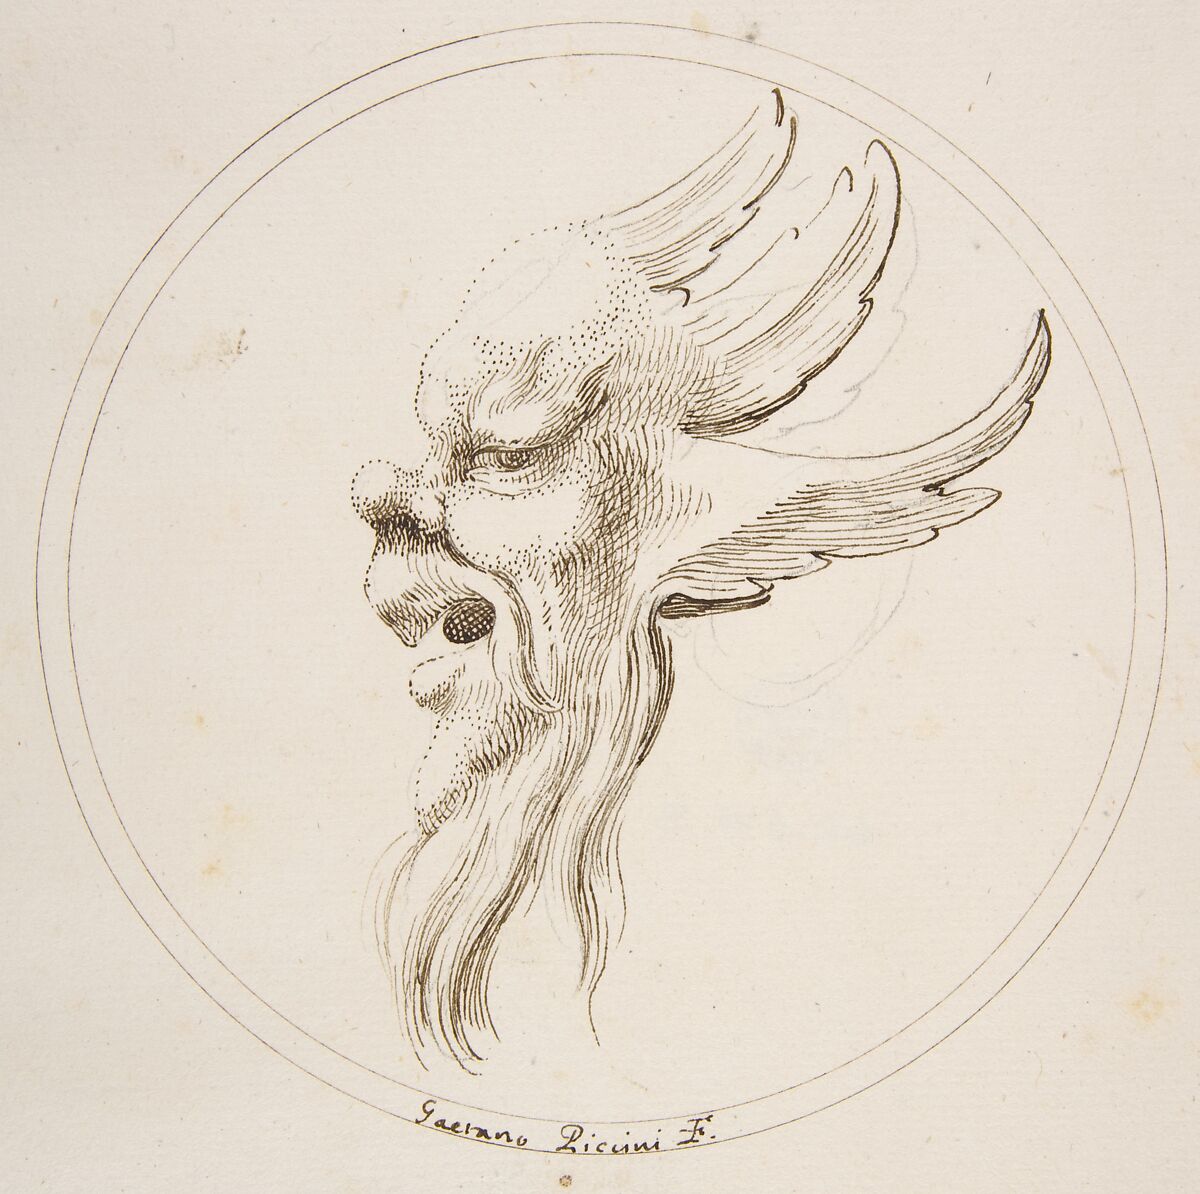 Grotesque Winged and Bearded Head Looking to the Left within a Circle, Gaetano Piccini (Italian, active Rome, 1710–30), Pen and brown ink 